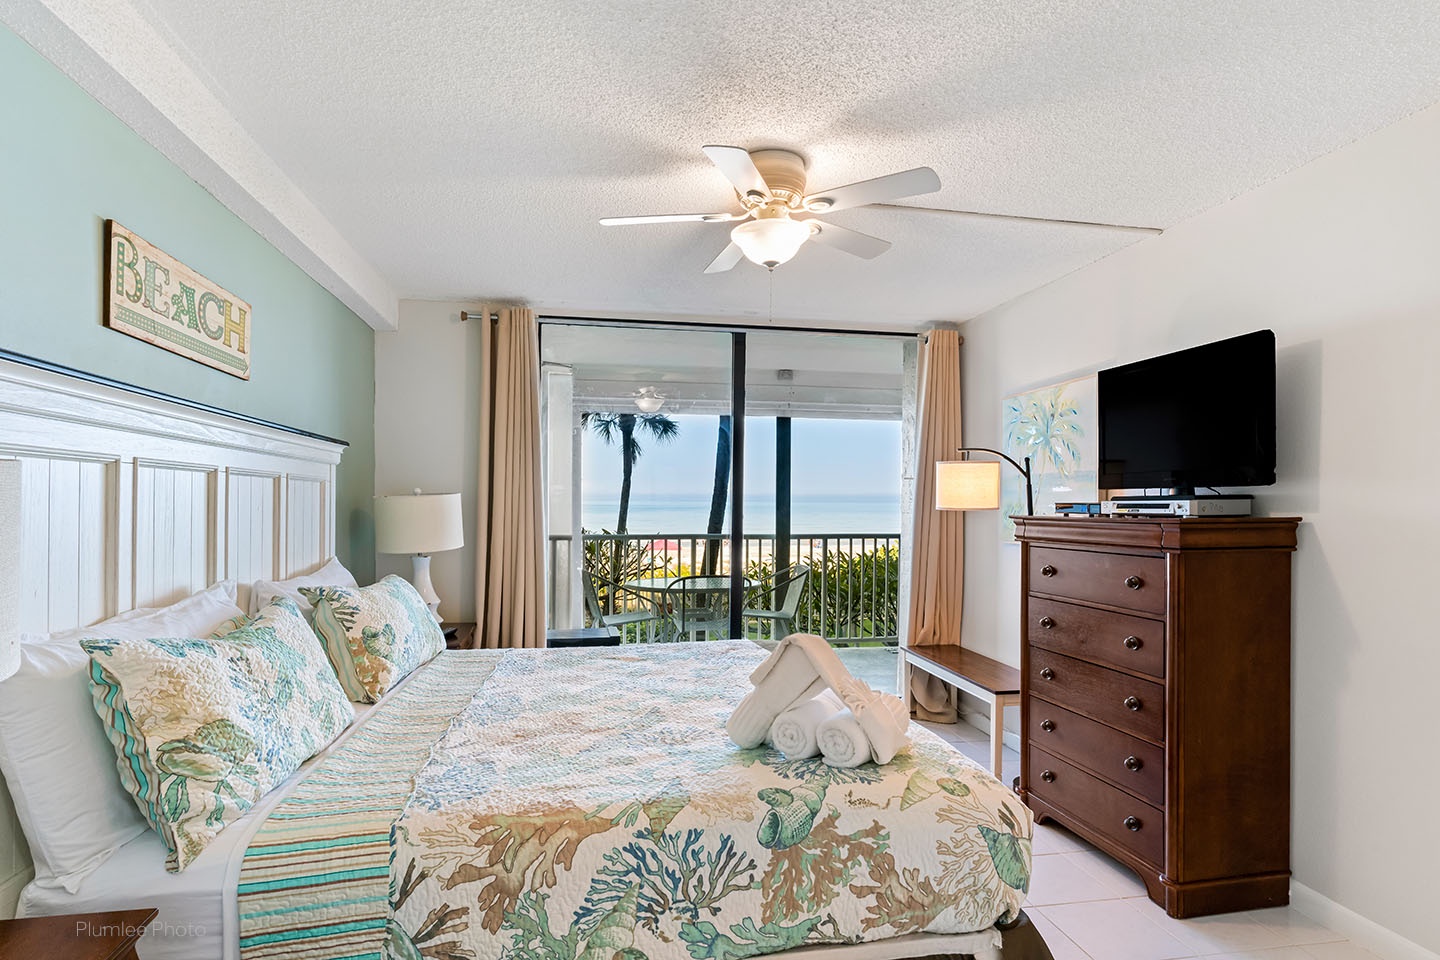 Gulf front Master bedroom with fan